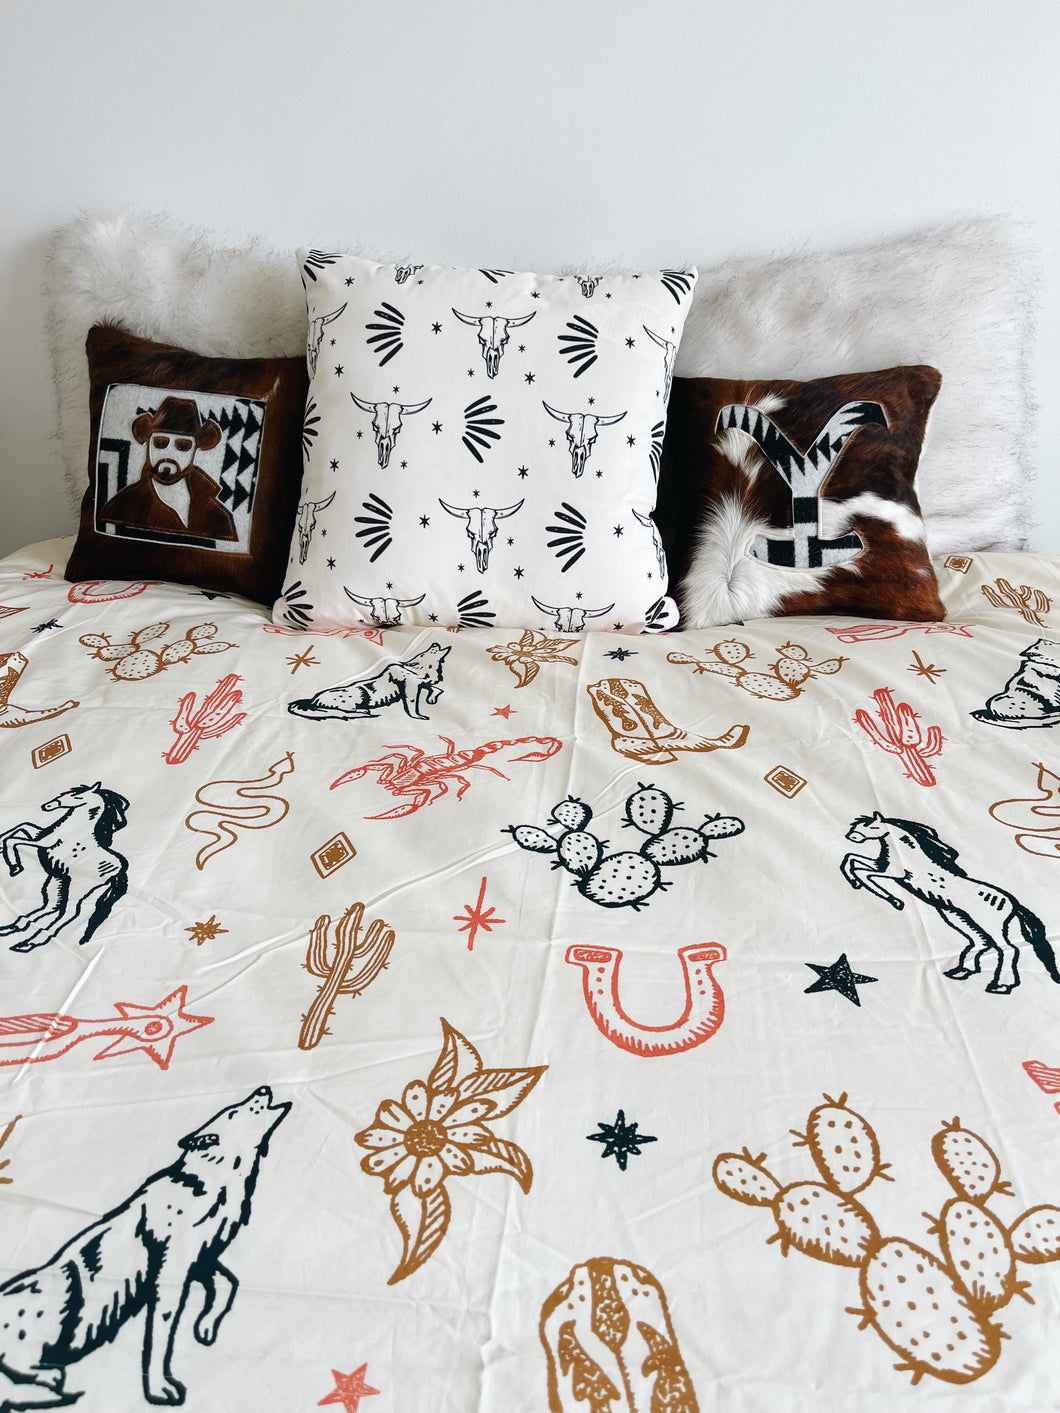 Day Out West - Duvet Cover